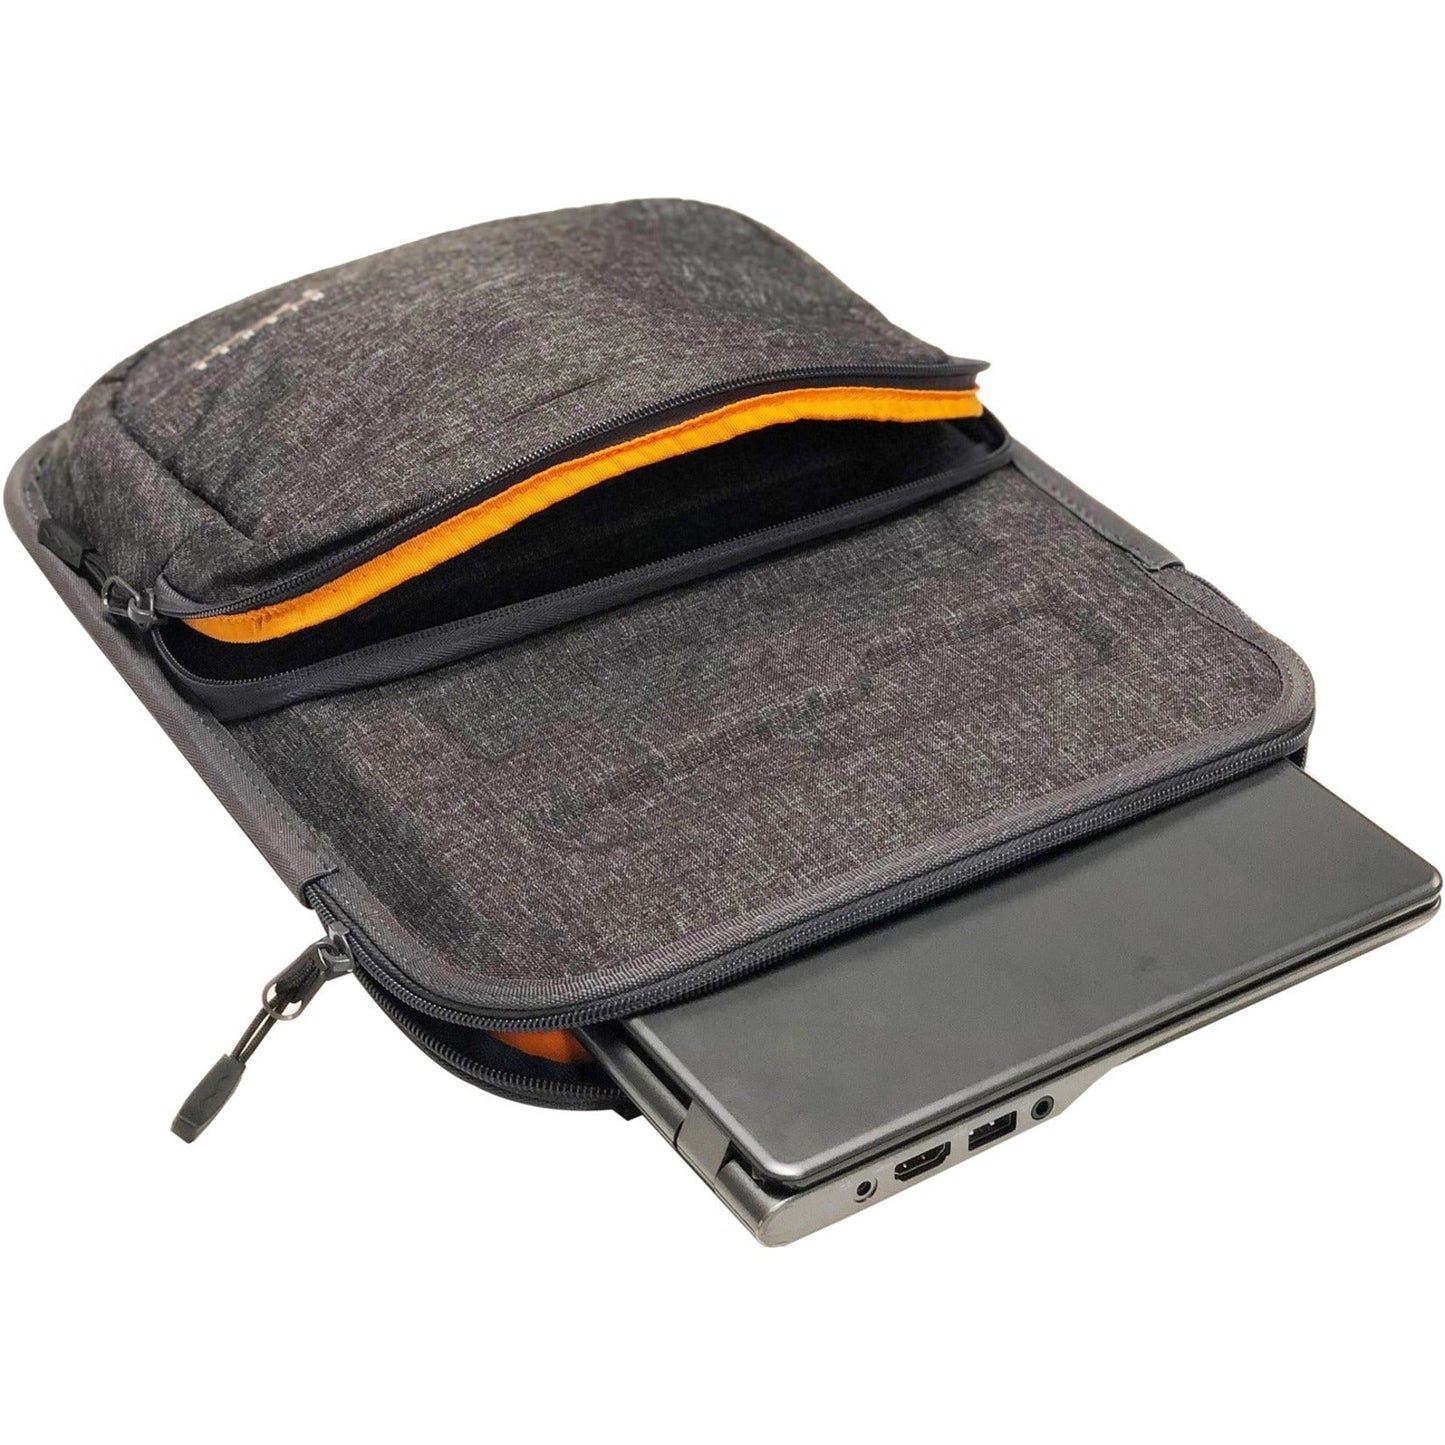 Higher Ground Capsule Plus Carrying Case (Sleeve) for 13" to 14" Notebook - Gray